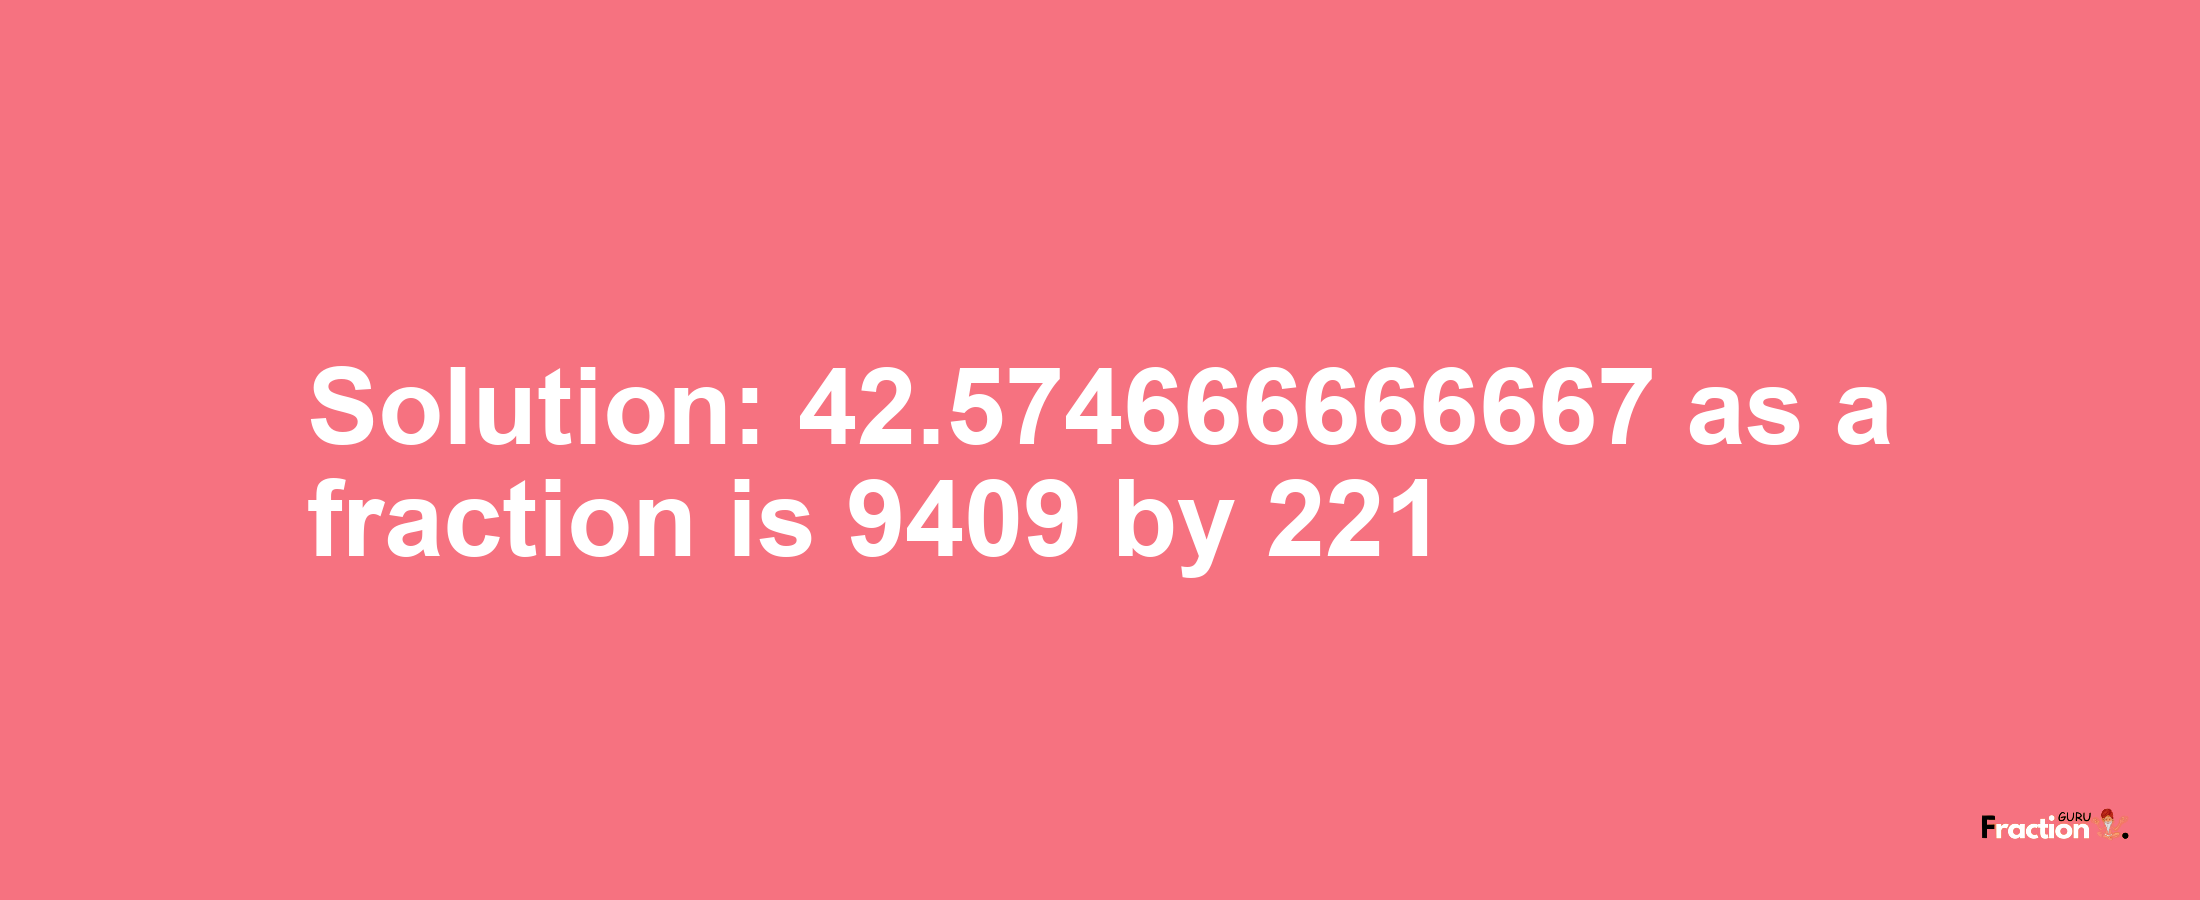 Solution:42.574666666667 as a fraction is 9409/221